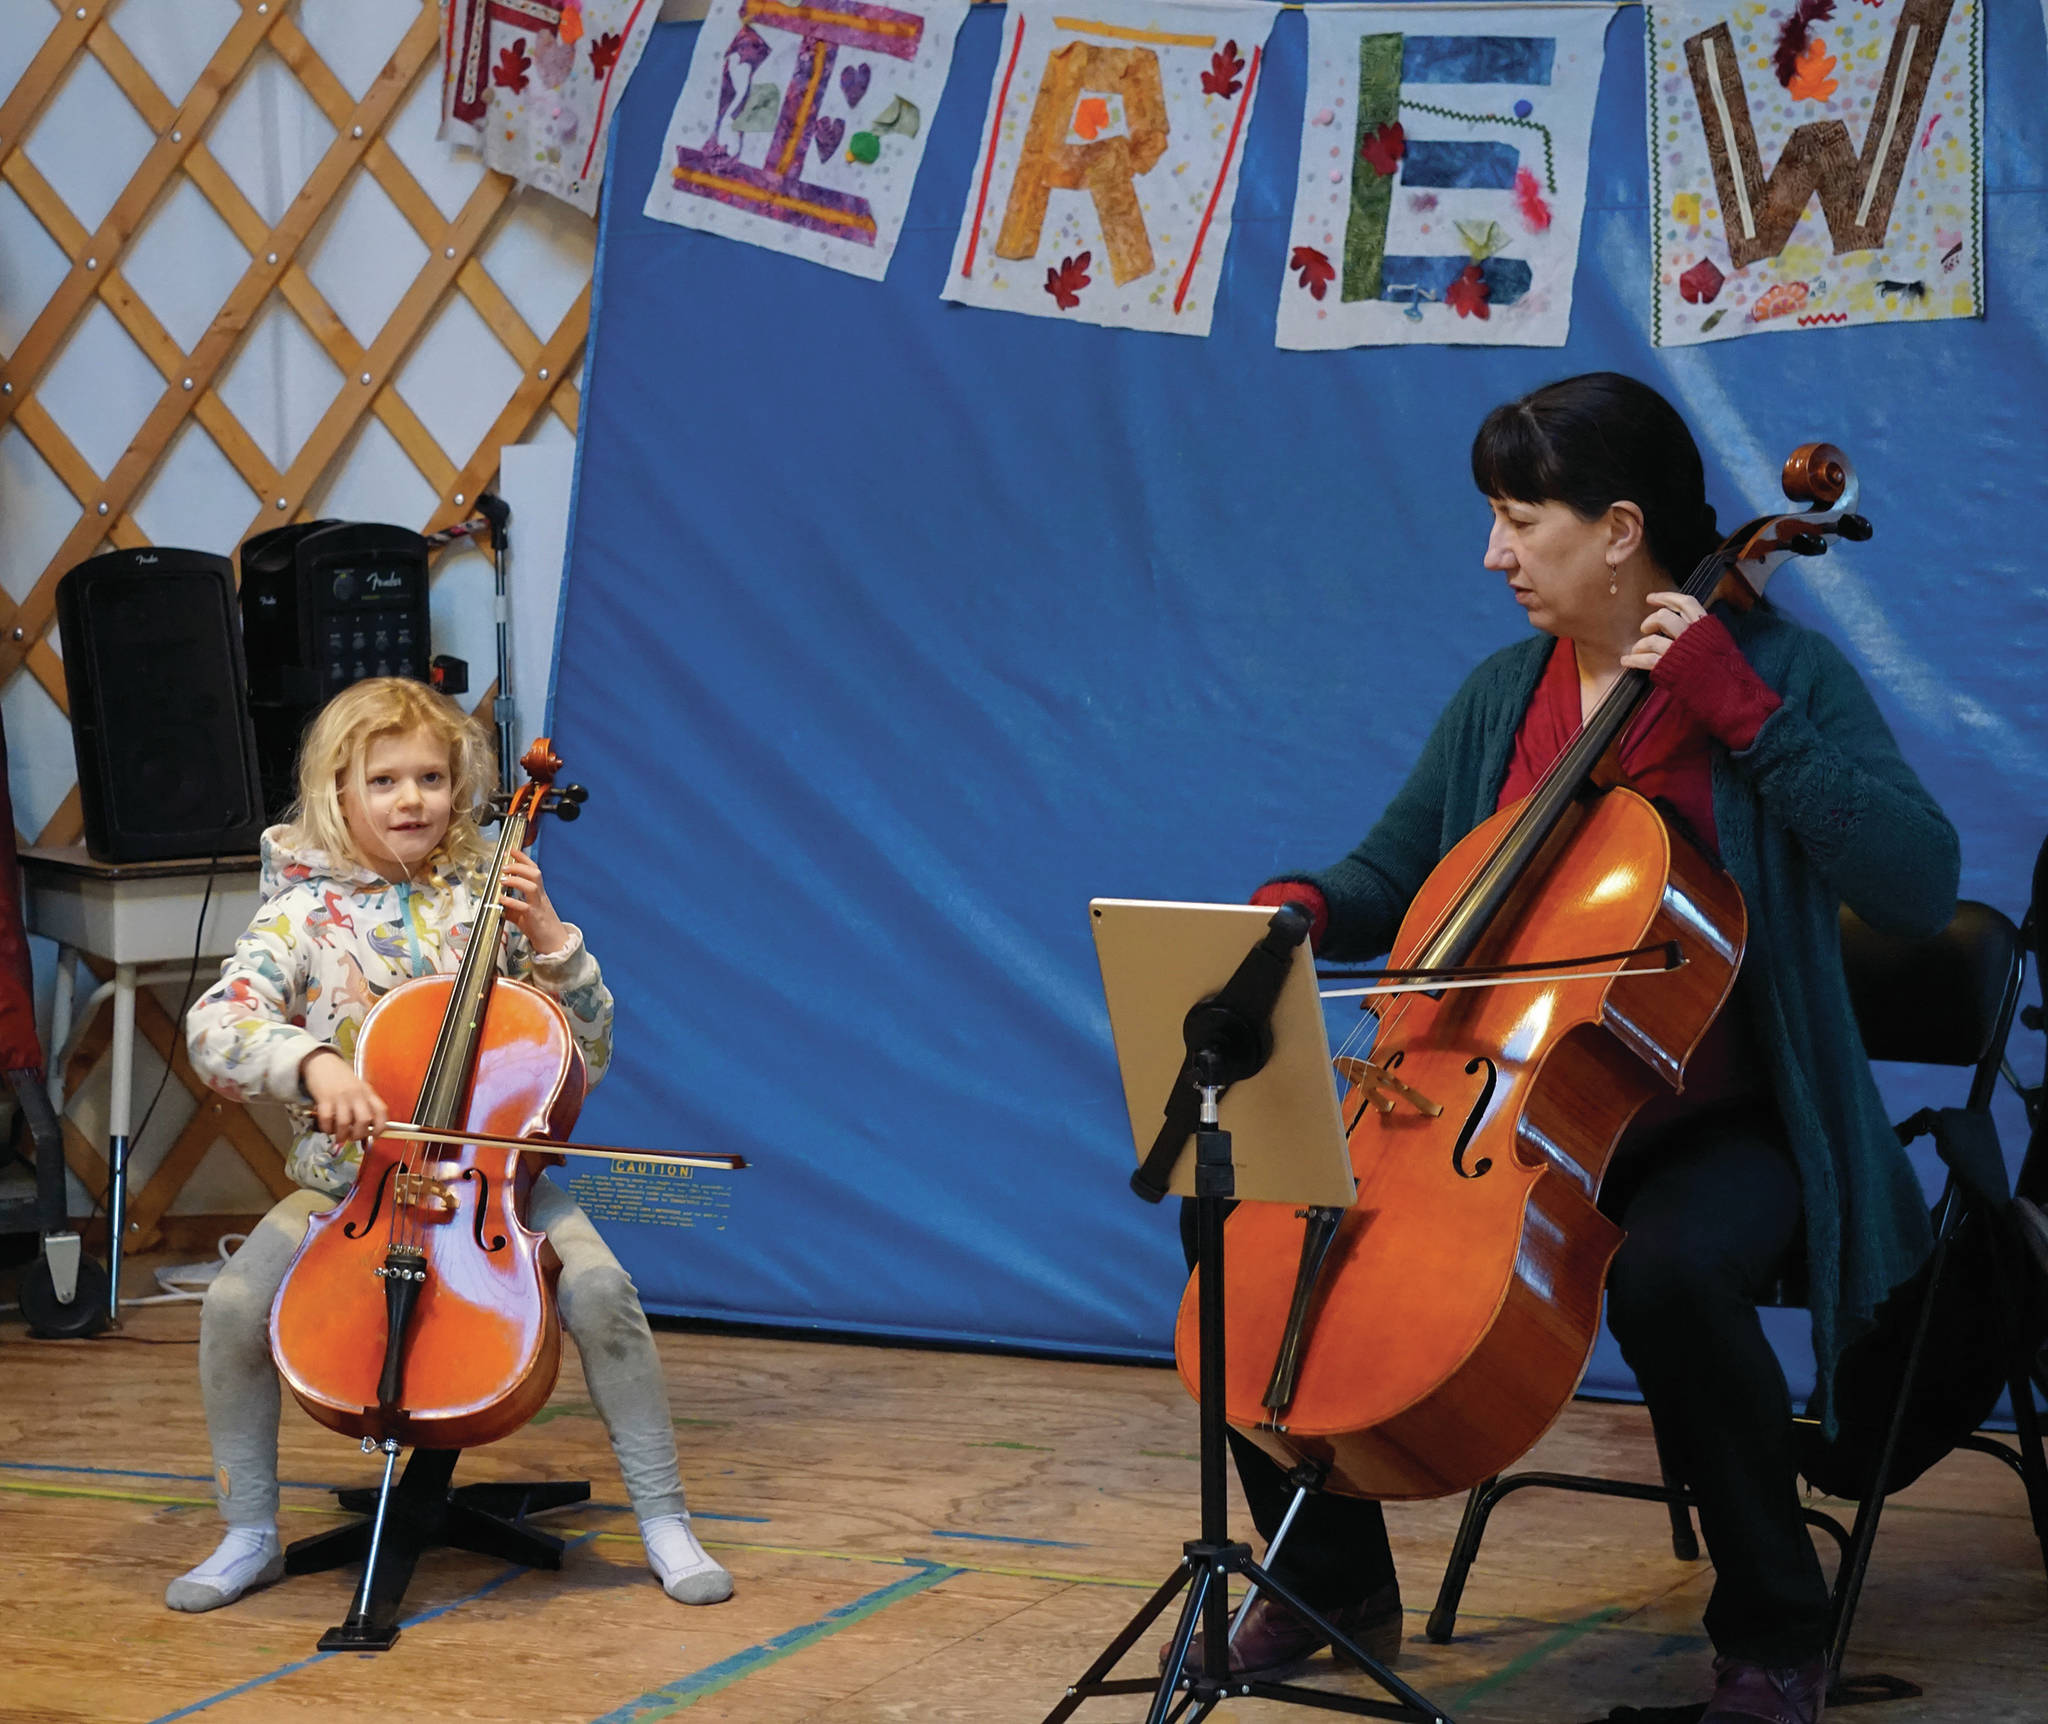 Nancy L. Ives, principal cellist for the Oregon Symphony Orchestra, Portland, plays with Lila Shavelson at Little Fireweed Academy on Friday, Dec. 20, 2019, in Homer, Alaska. Ives talked with Fireweed students about cycles, a theme they have been studying this year, and how they fit in music. She also performed for a concert fundraiser at the Pratt Museum that night. (Photo by Michael Armstrong/Homer News)